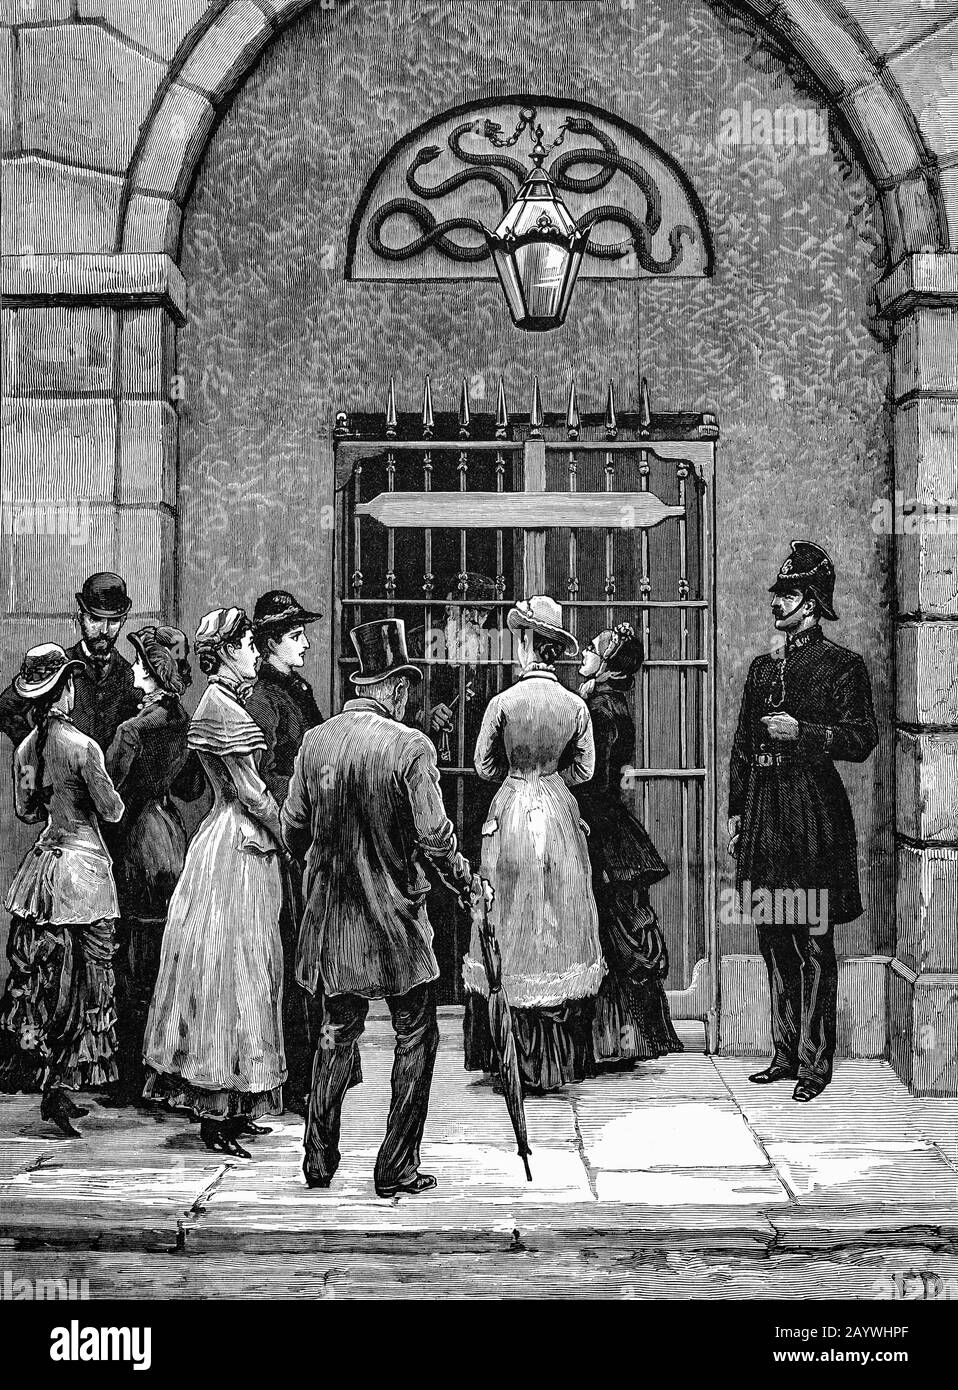 Visitors outside the entrance to Kilmainham Jail, in Dublin, Ireland at the time of the incarceration of Charles Stewart Parnell (1846-1891), Irish nationalist politician who served as Leader of the Irish Parliamentary Party from 1882 to 1891 and Leader of the Home Rule League from 1880 to 1882. When Parnell's own newspaper, the United Ireland, attacked the Land Actand he was arrested on 13 October 1881, together with his party lieutenants and imprisoned under a proclaimed Coercion Act for "sabotaging the Land Act",  signed by Parnell calling for a national tenant farmer rent strike. Stock Photo